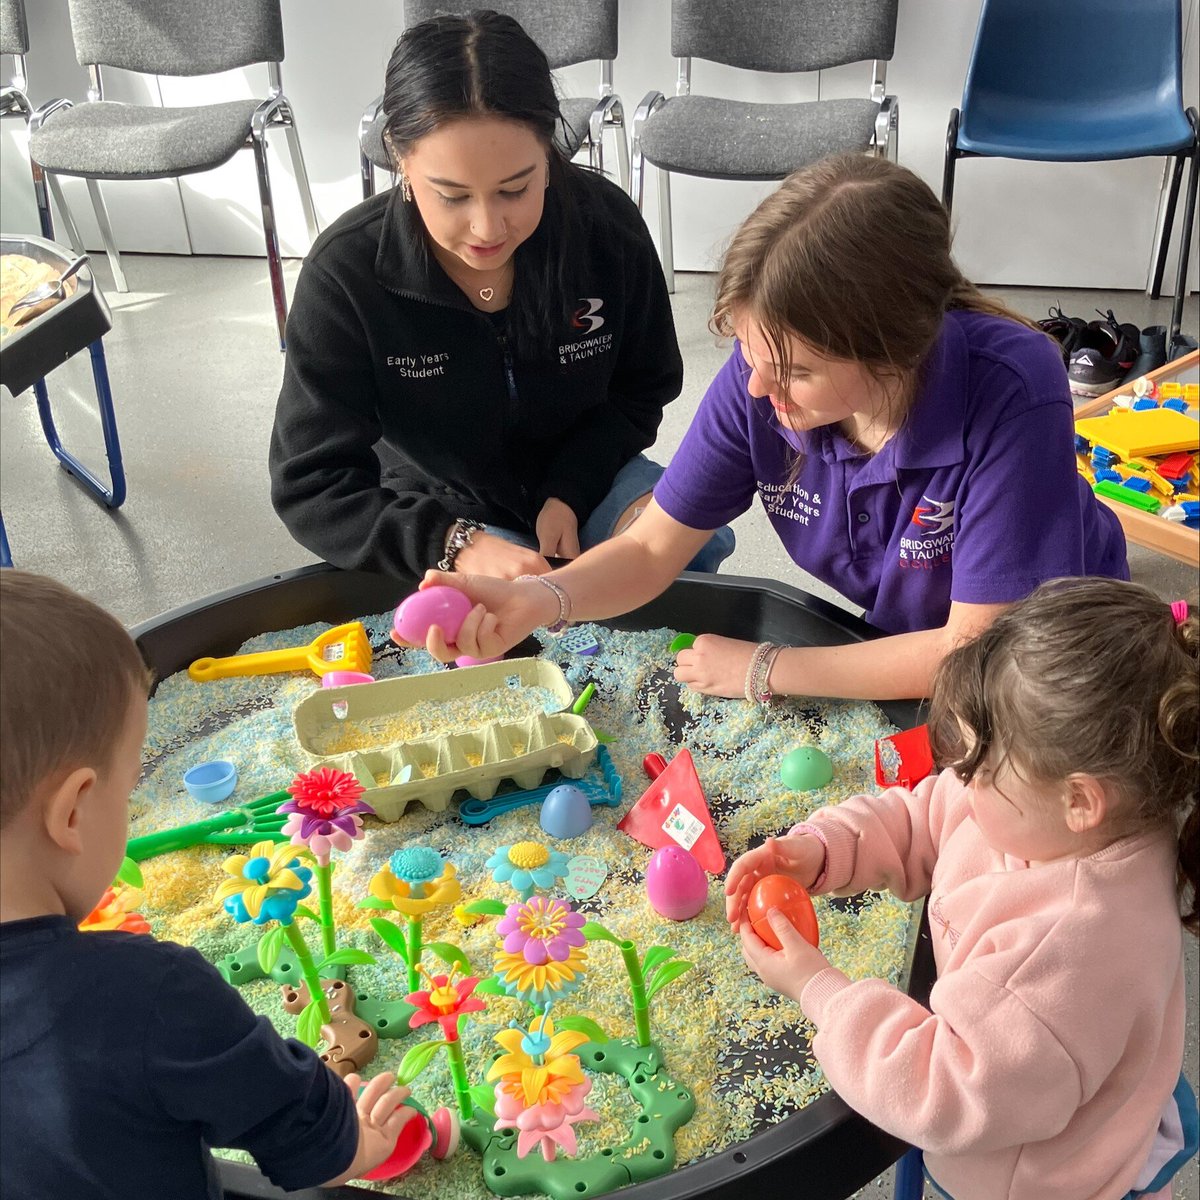 📣 Easter Stay and Play Activities 'Thoroughly Enjoyed' by Local Children 👉 Read more: hubs.ly/Q02tNRs60 What a success! Well done to all involved ✨ #BTC #BringingOutYourBest #Easter #StayandPlay #Education #EarlyYears